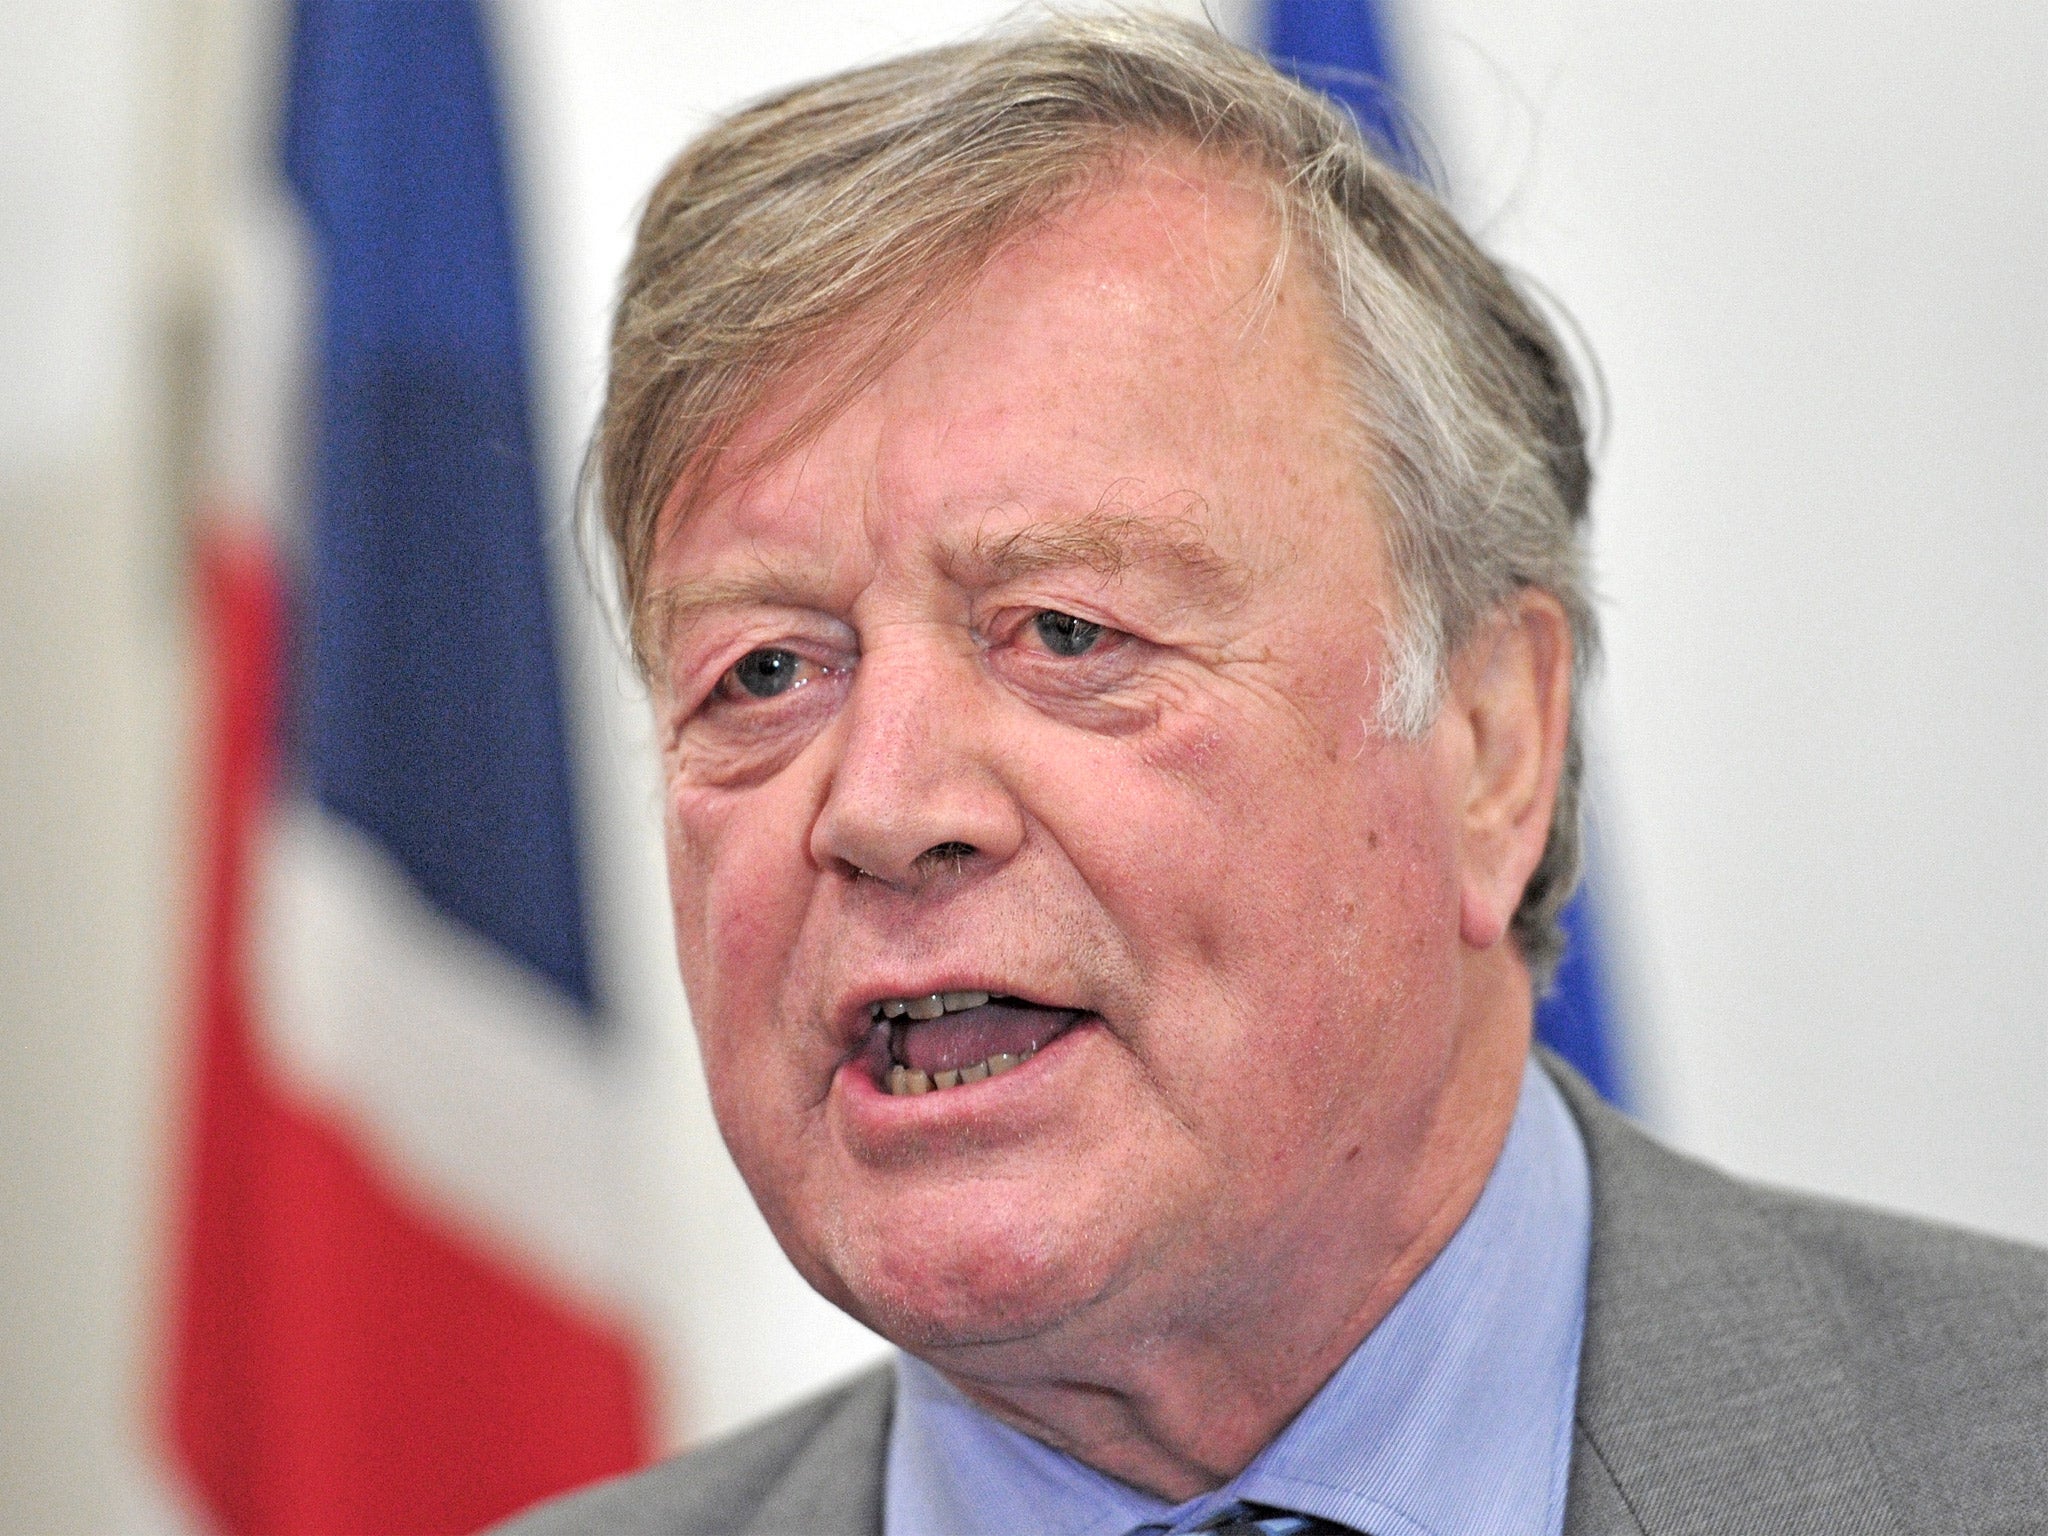 Ken Clarke speaks at the launch of the pro-Europe British Influence group